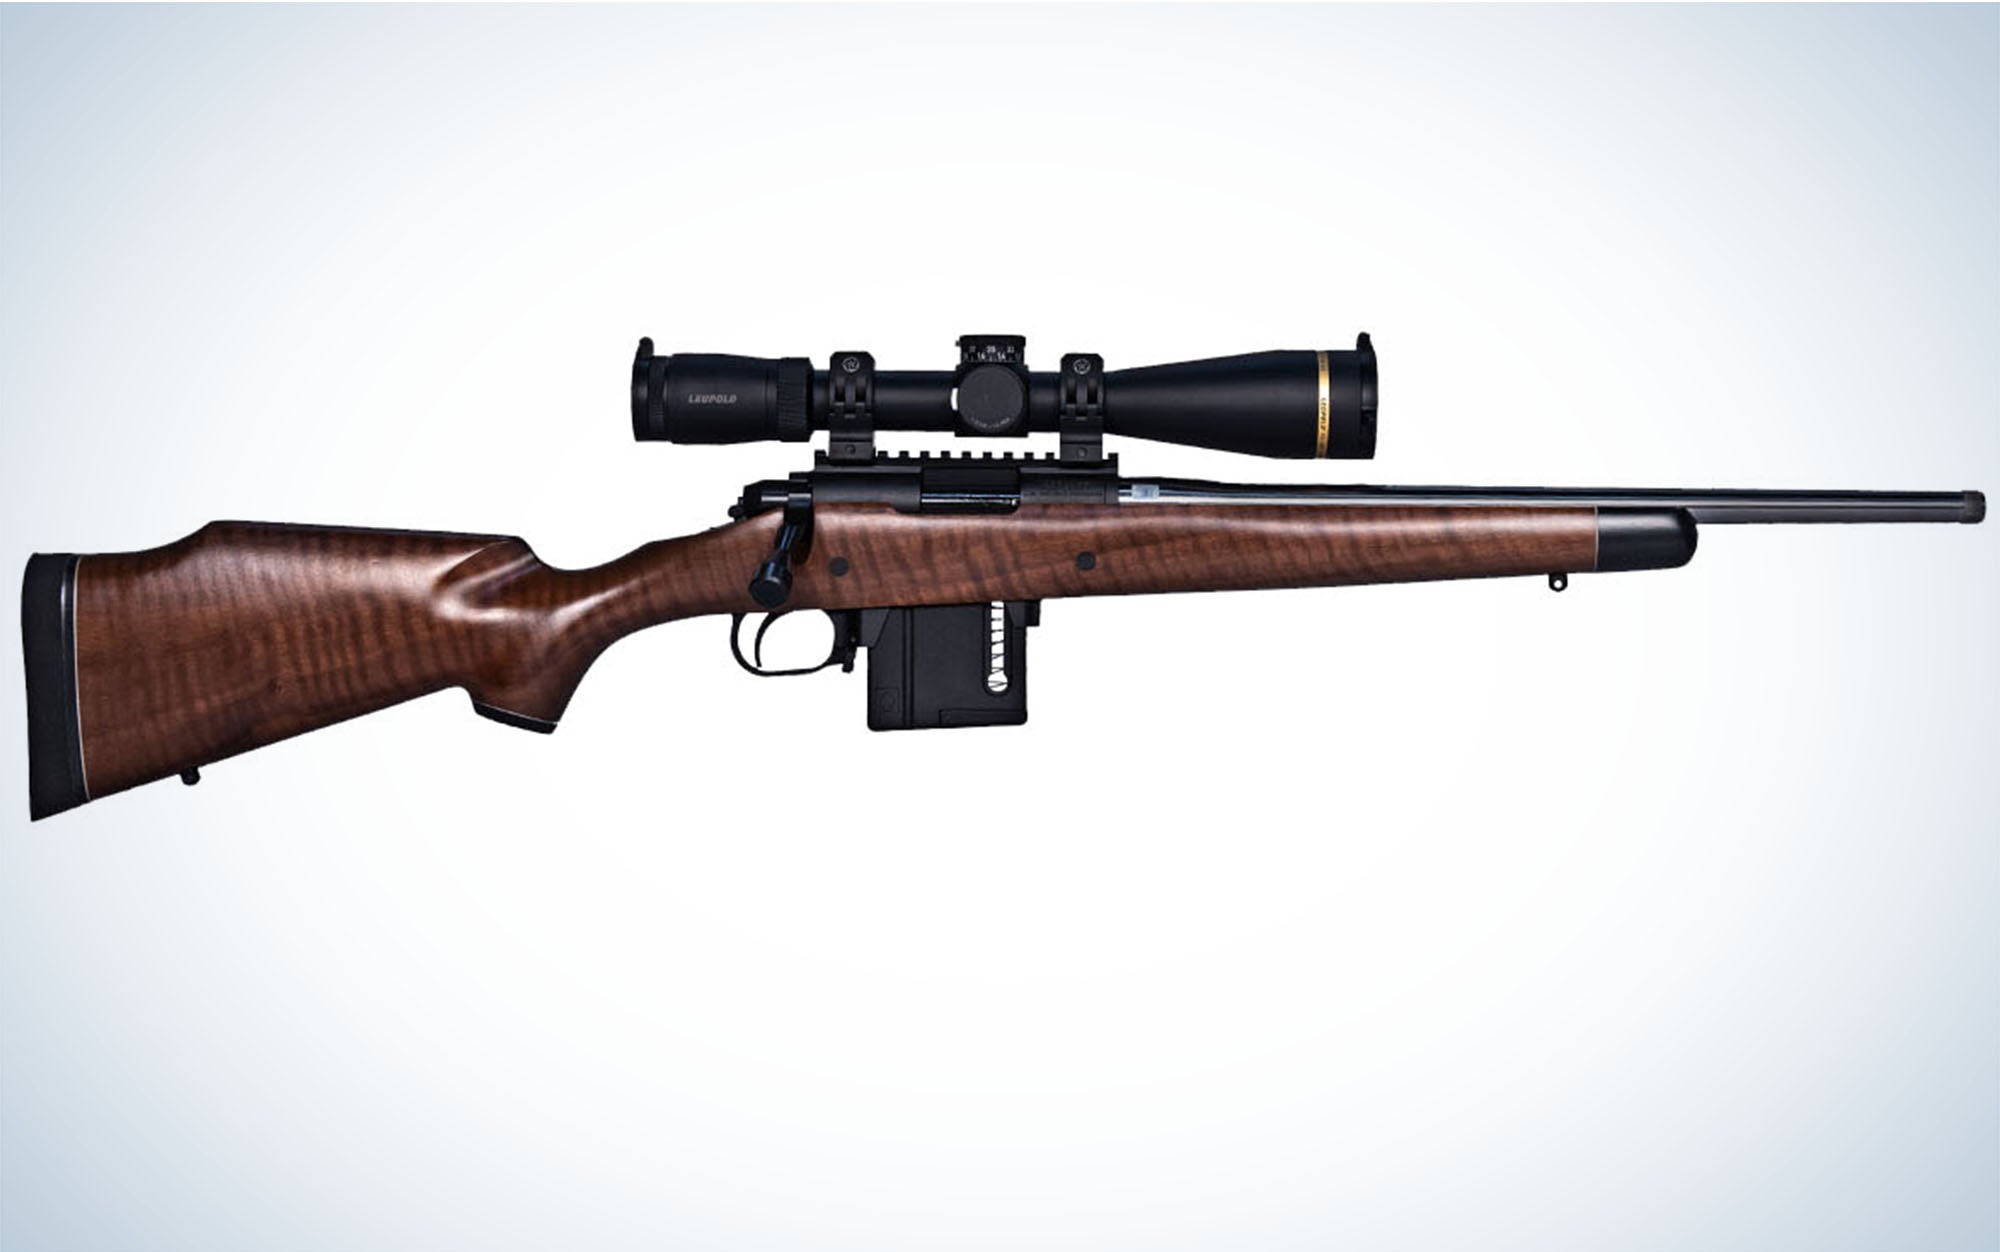 The Vudoo Sinister is the best high-end rimfire rifle.